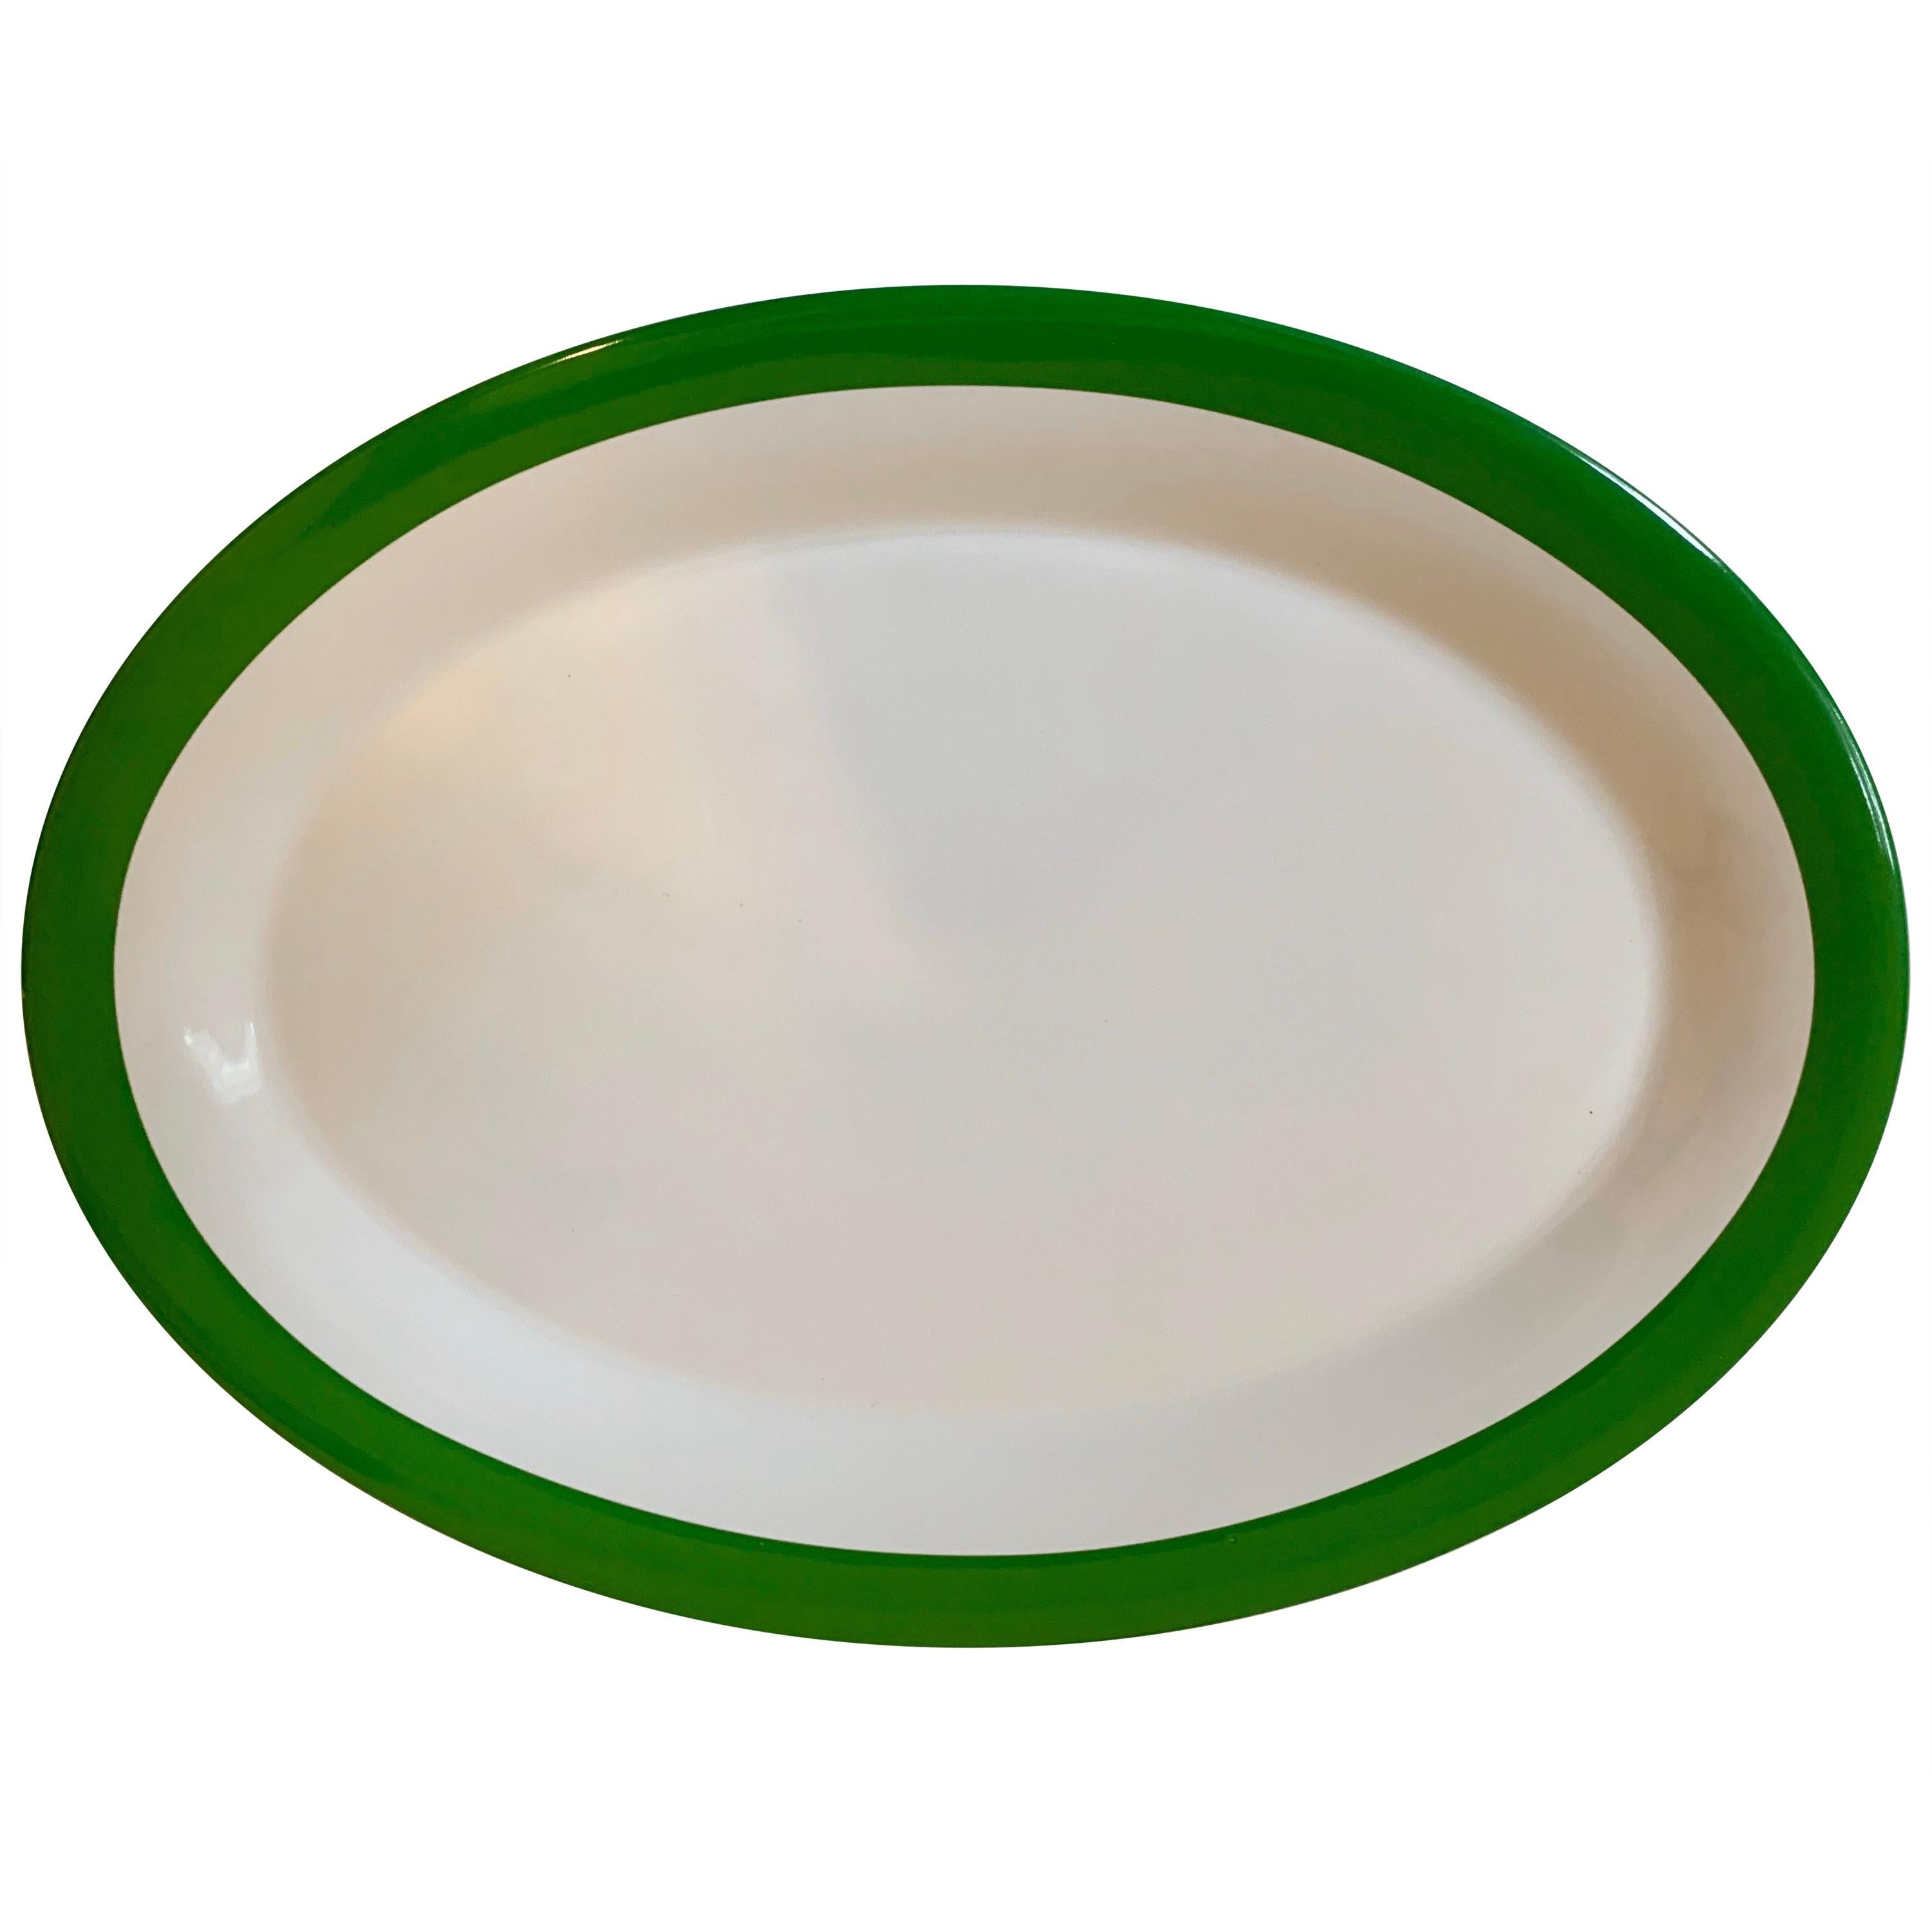 Lenox Kate Spade New York Rutherford Circle Green Oval Serving Platter